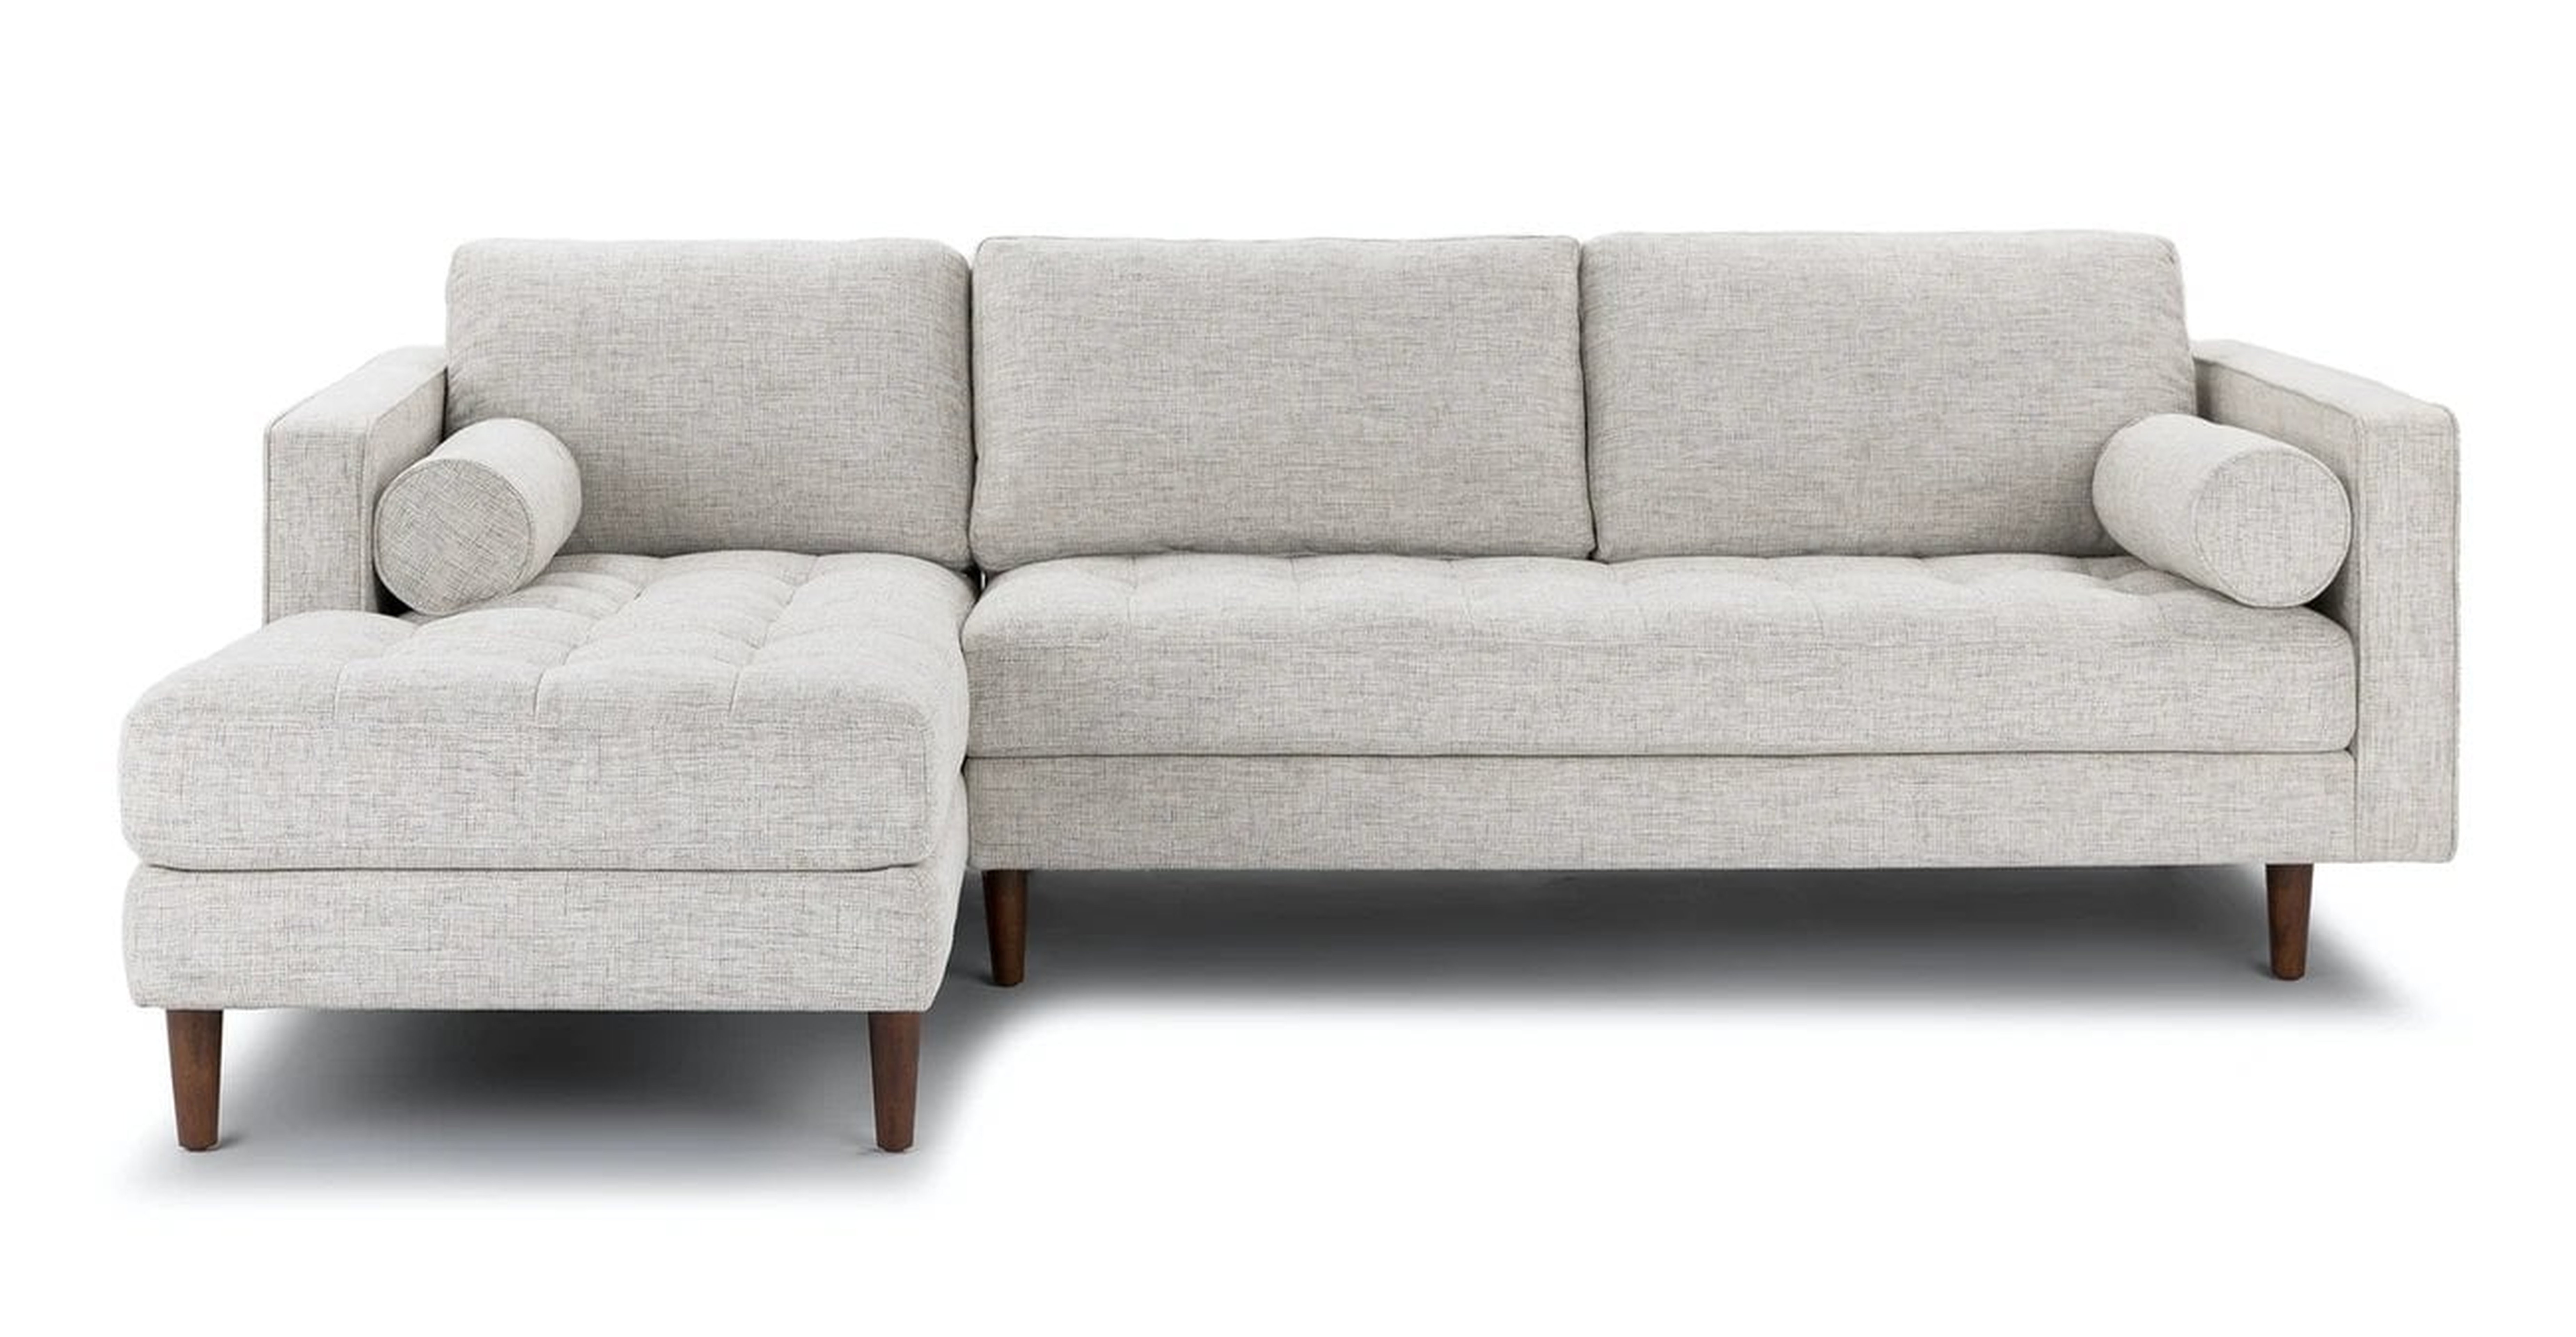 Sven Birch Ivory LEFTSectional Sofa - Article